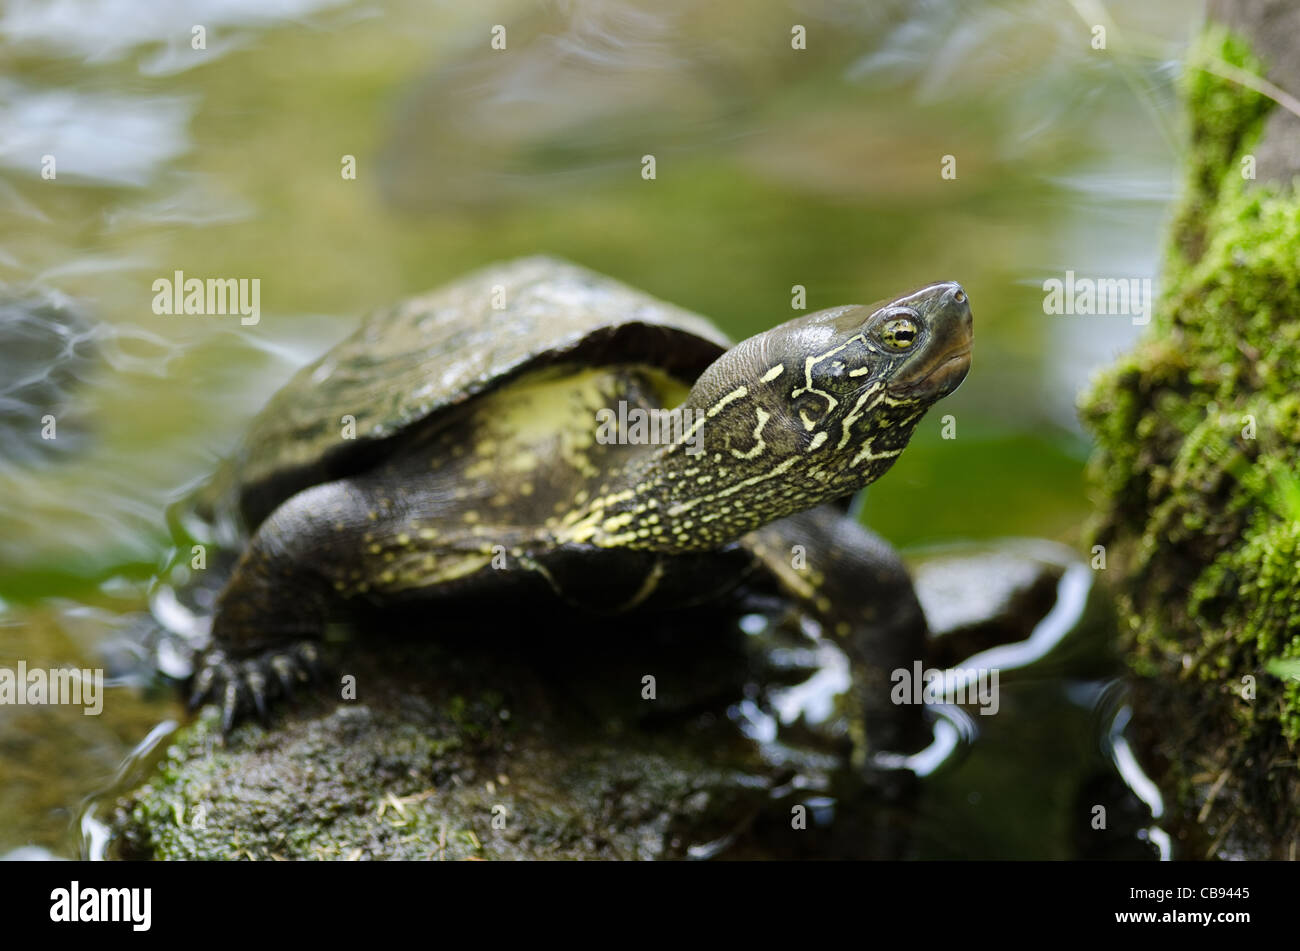 Chinese pond turtle sitting on a stone in water, Mauremys reevesii, an endangered species Stock Photo